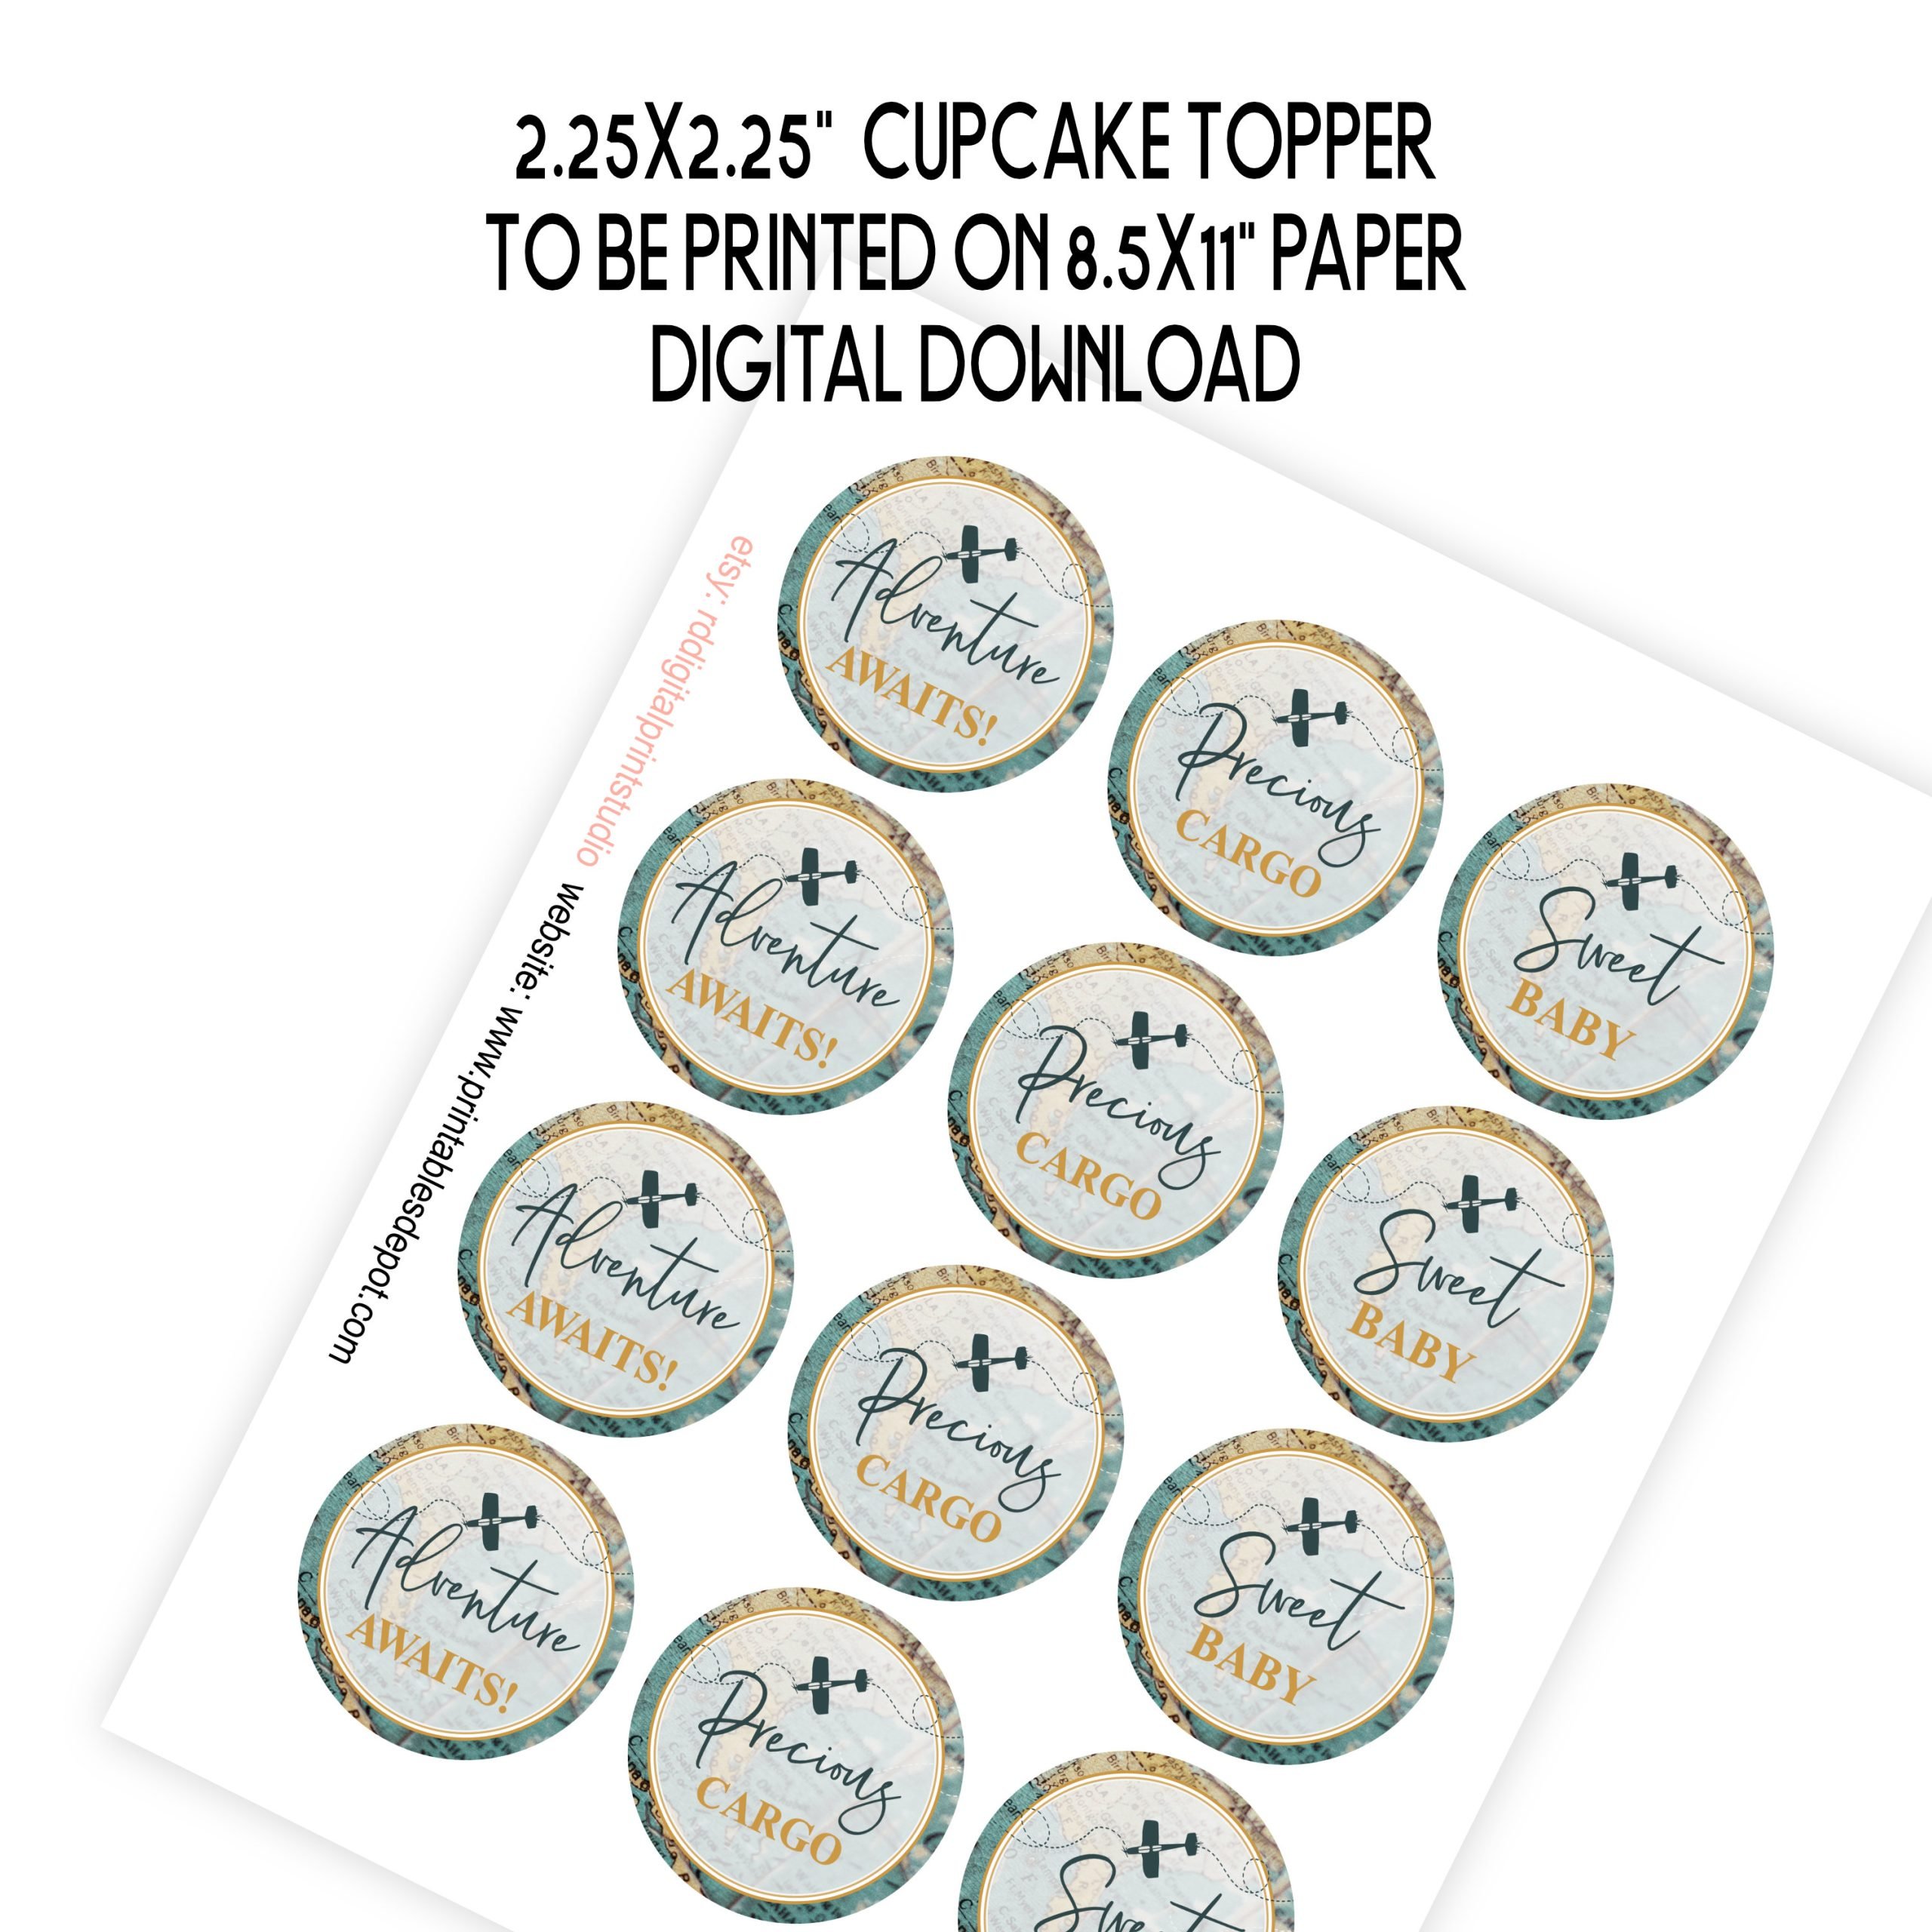 Cupcake Toppers Travel Cupcake Toppers & Favor Tags | Baby Shower Party Decor | Sweet Adventure Awaits | PRINTABLE adventure-themed baby shower